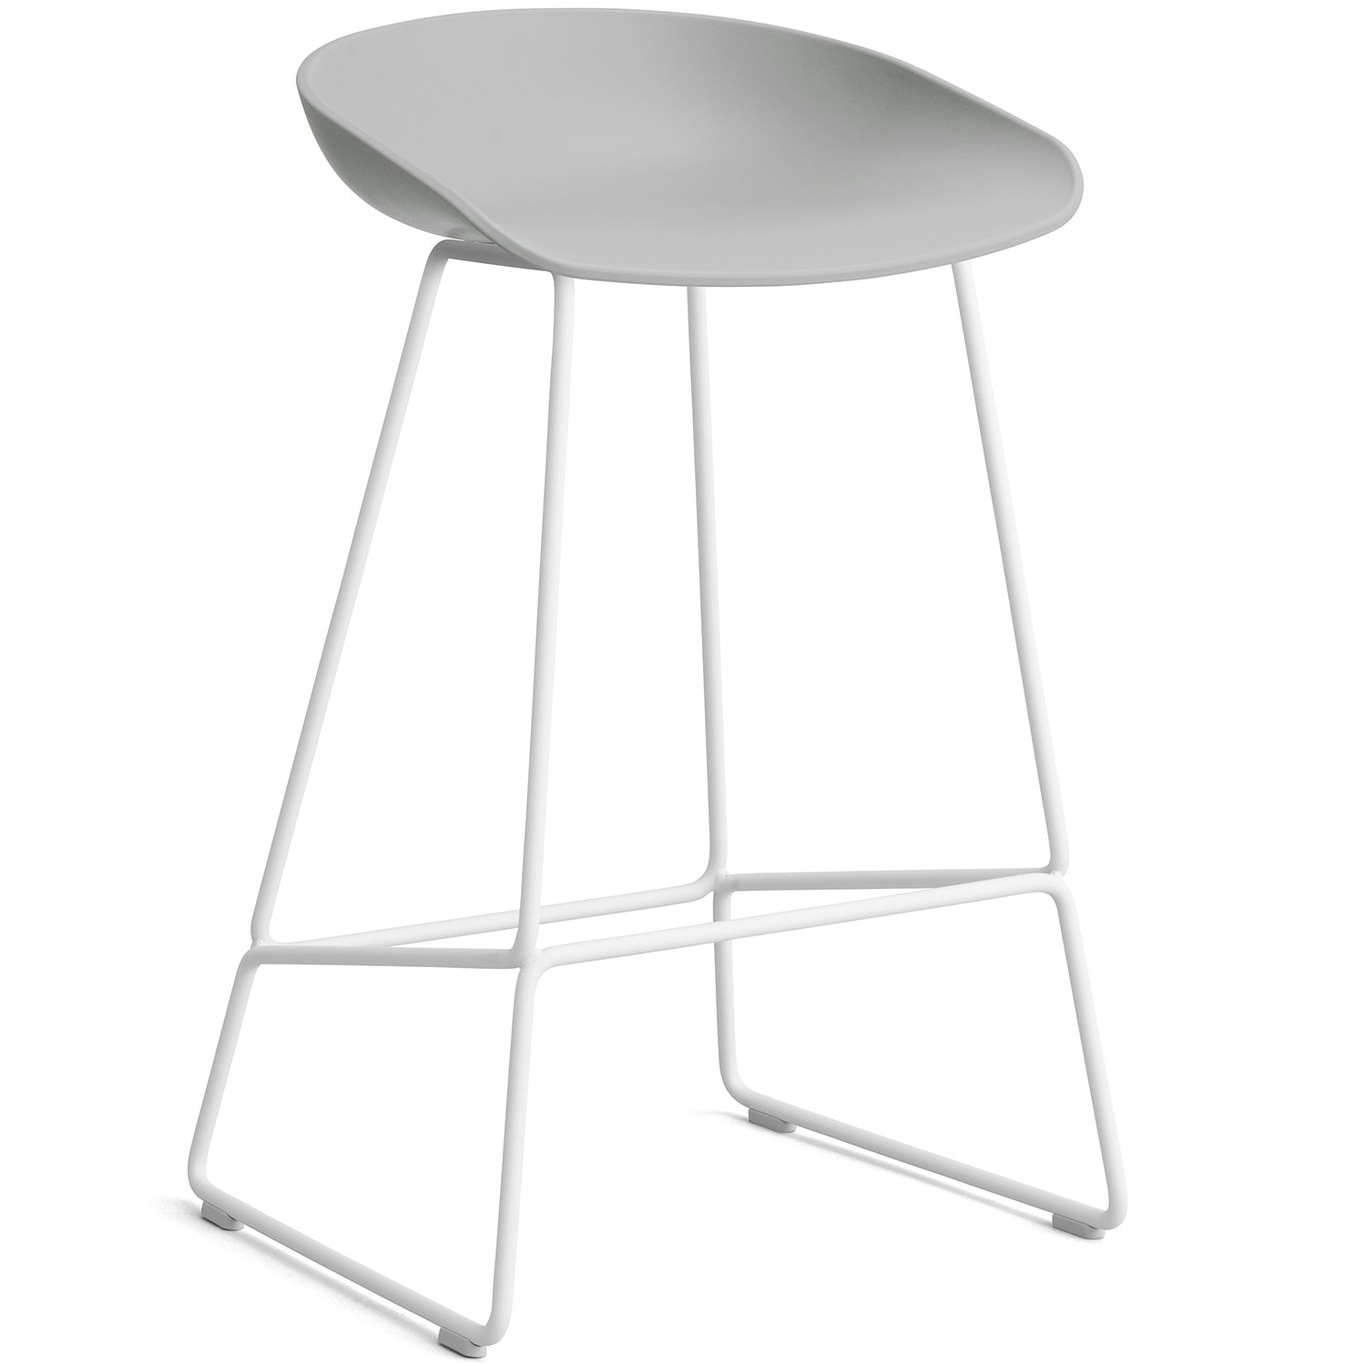 AAS 38 2.0 Bar Stool 65 cm, Stainless Steel White / Concrete Grey